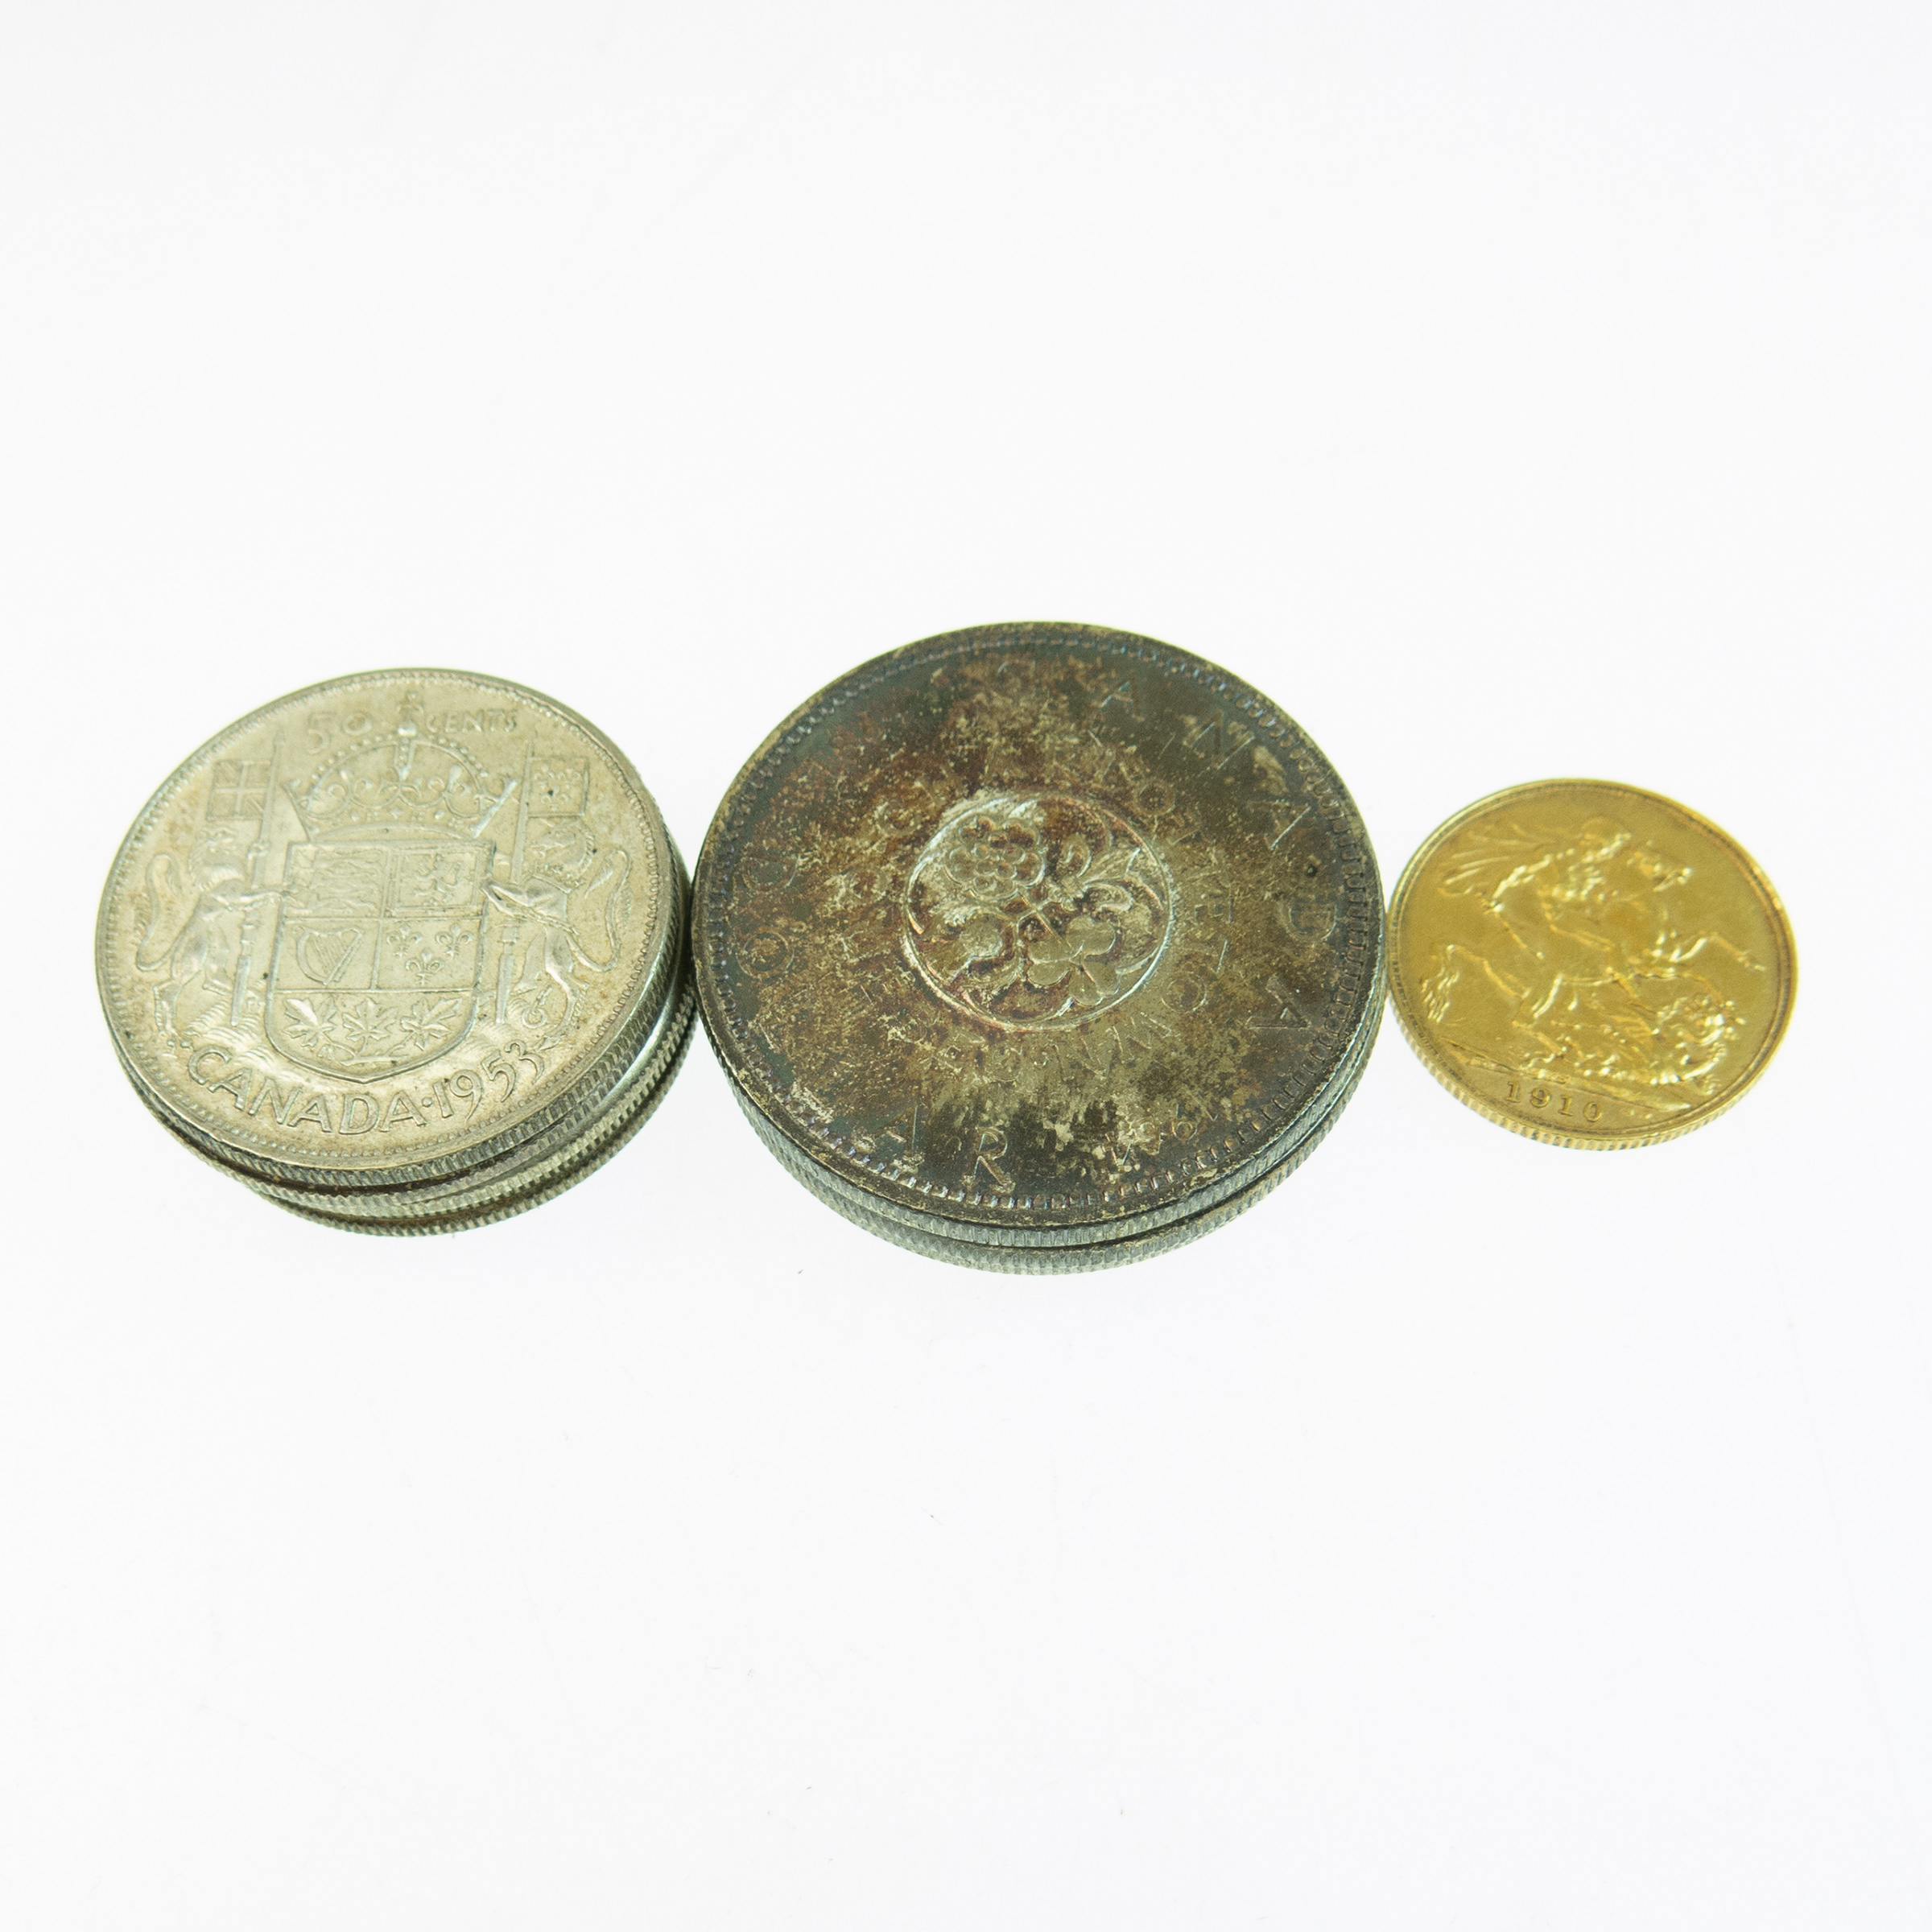 Australian Gold Sovereign And Canadian Silver Coins 3 silver dollars and 5 fifty cent coins